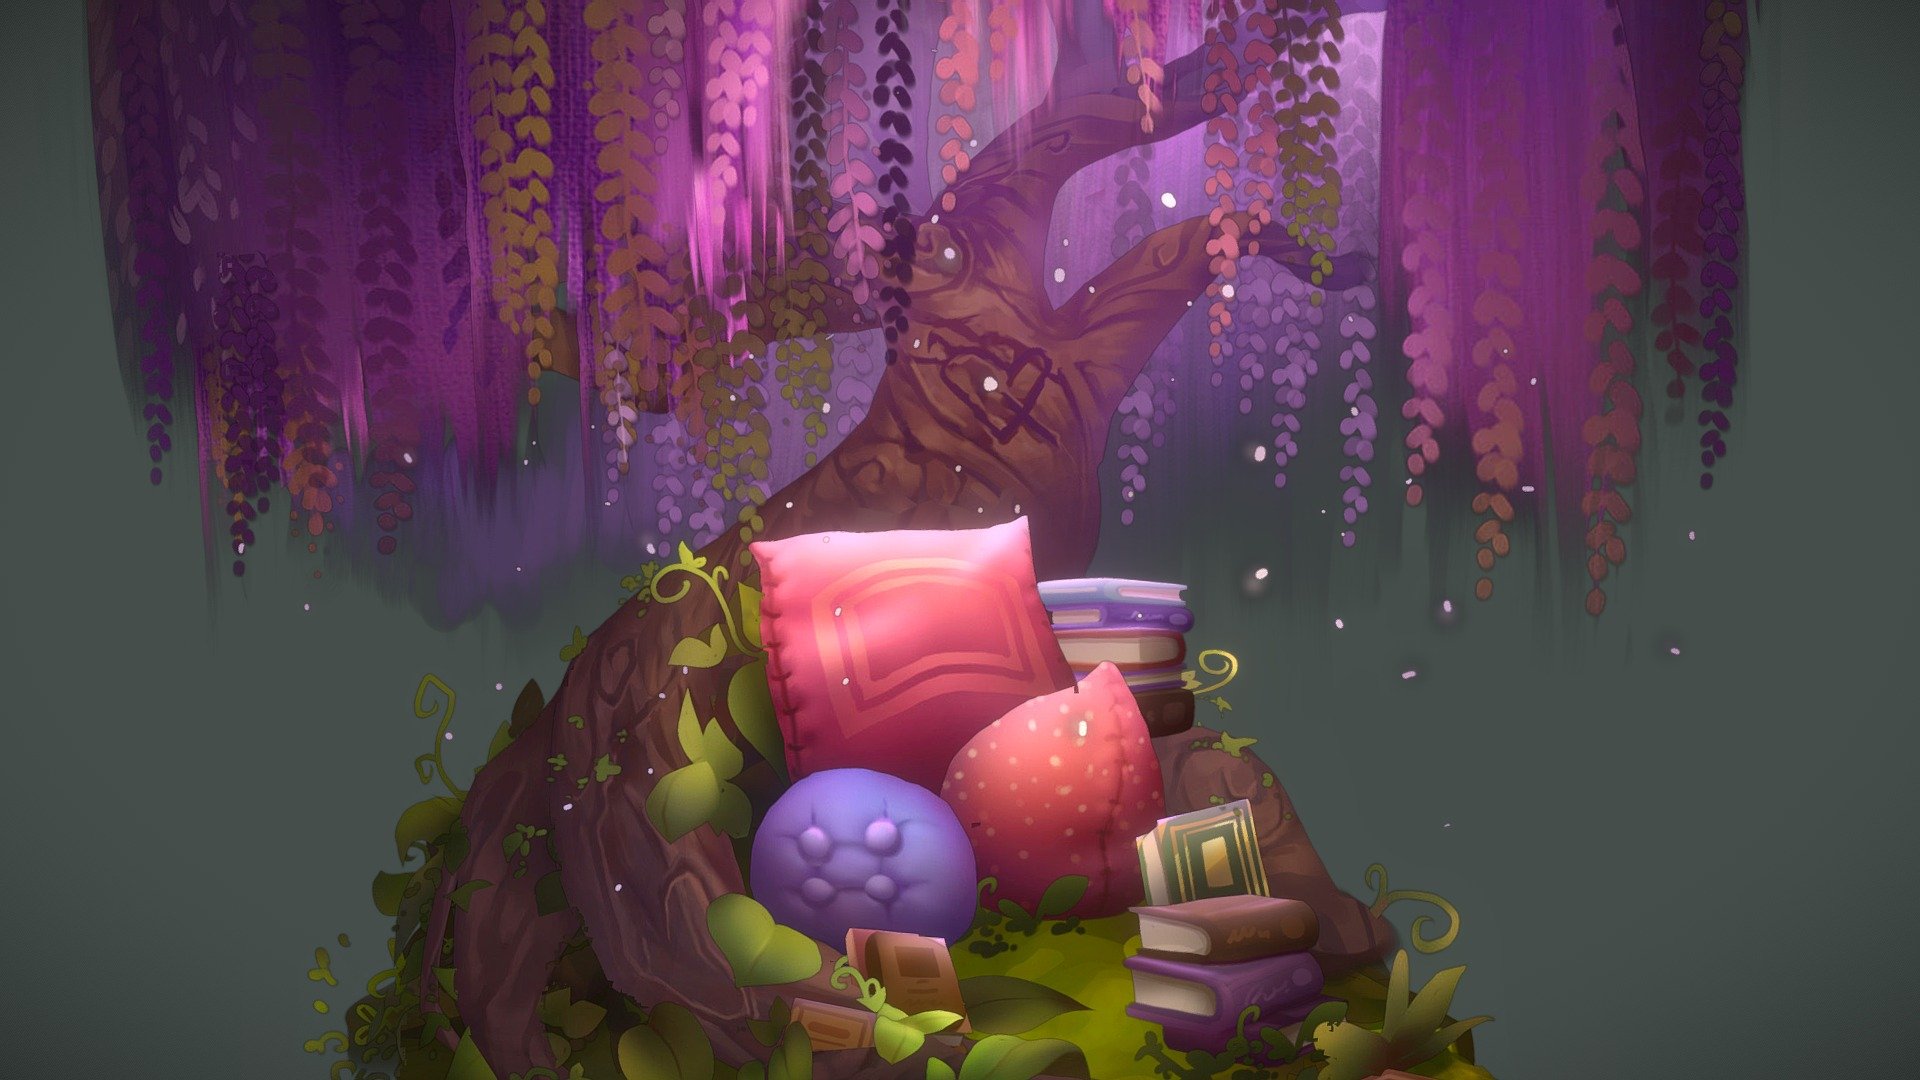 A 2.5D assignment from my CGMA course on Creating Stylized Game Assets with Ashleigh Warner!

This project was heavily inspired by the Hermannshof Botanical Garden in Germany, where I used to stroll and read under the beautiful wisteria trees for hours as a child. I wanted to recreate that magical little space for myself with this project :)

Learned a lot from my first 2.5D model - will update this project later following Ashleigh's feedback. 

Cheers!

[https://sketchfab.com/ashdoodles] - Under The Wisteria Tree - 3D model by Katametz 3d model